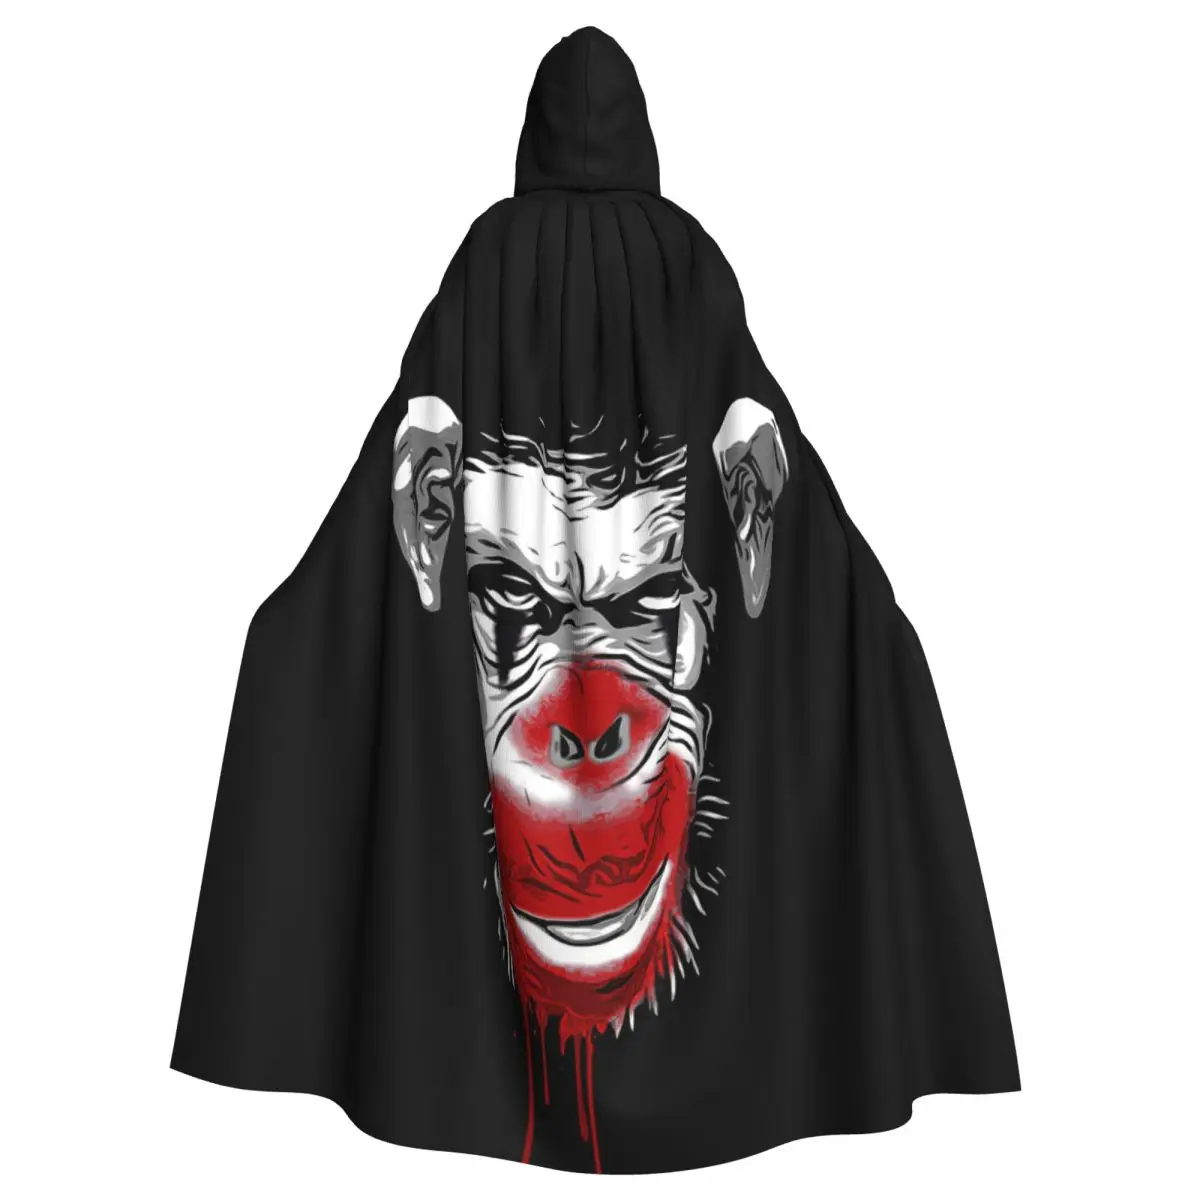 

Evil Monkey Clown Halloween Party Cosplay Woman Men Adult Long Witchcraft Robe Hood